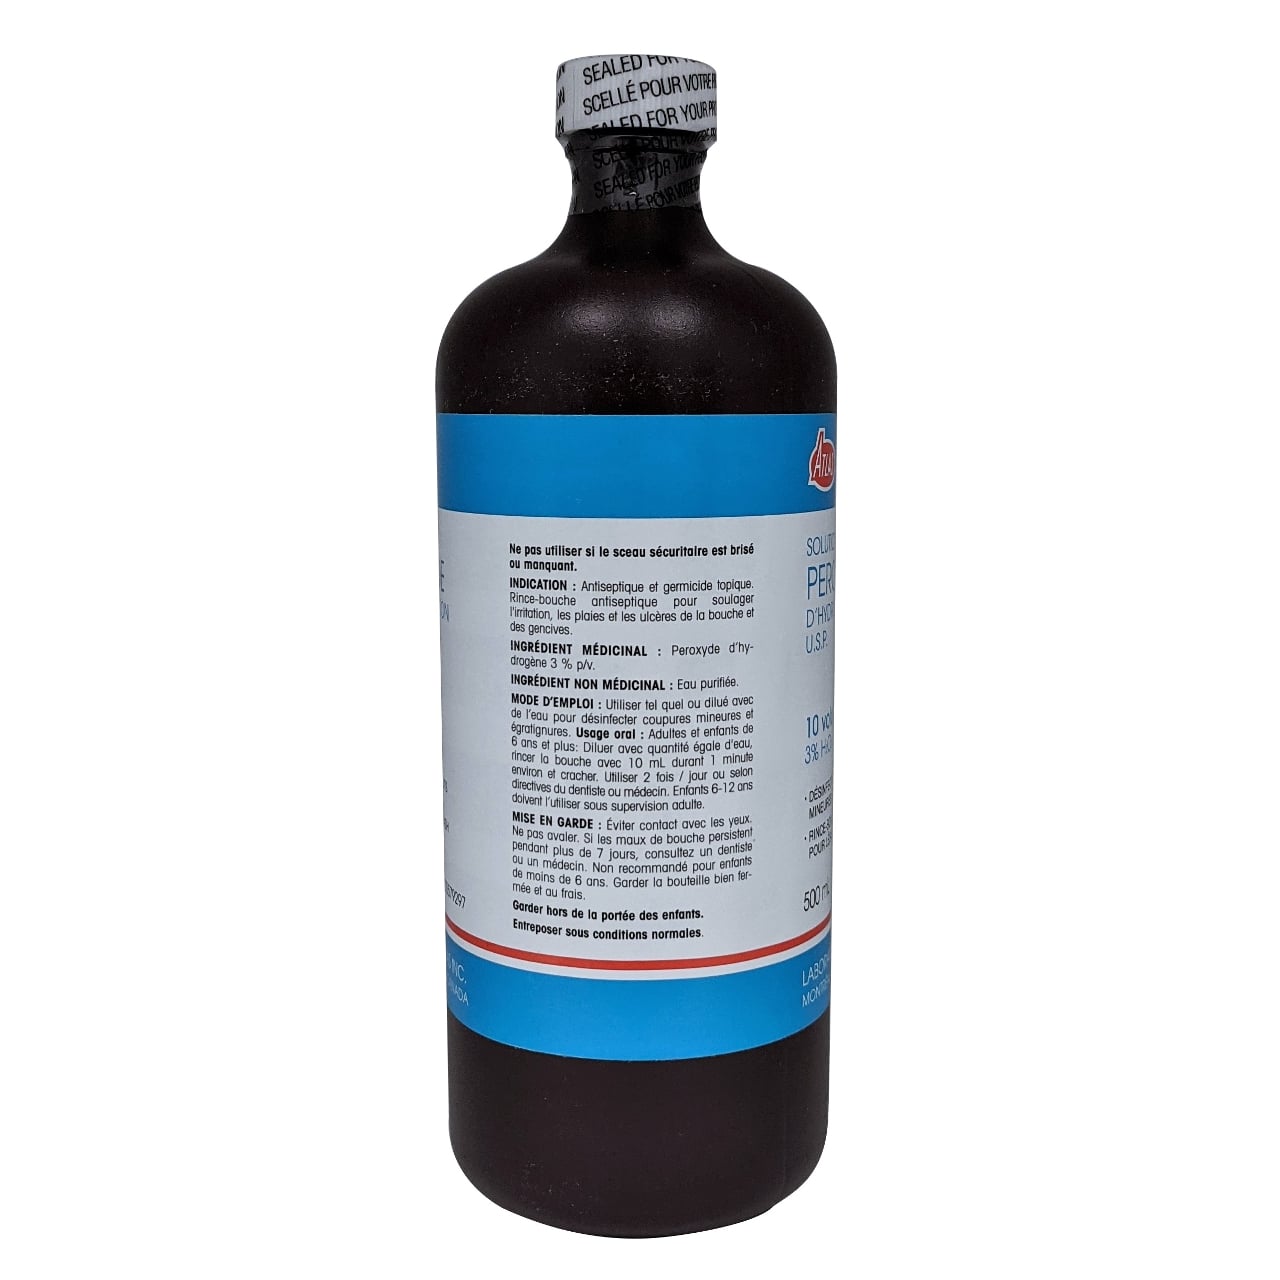 Indication, ingredients, directions, and caution for Atlas Hydrogen Peroxide Topical Solution USP 3% (500 mL) in French